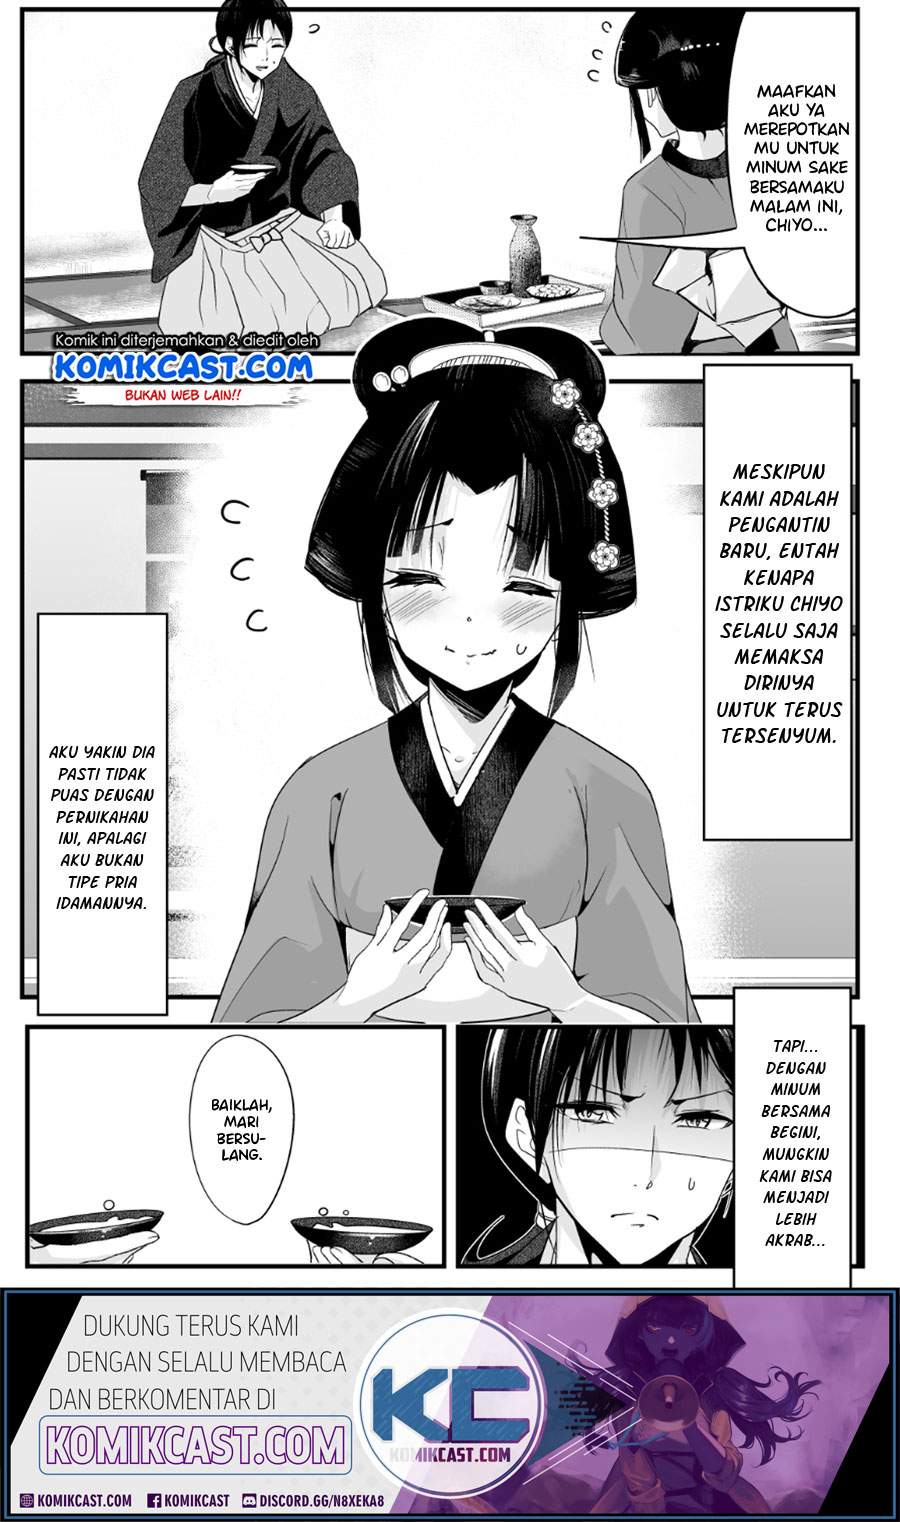 My New Wife Is Forcing Herself to Smile Chapter 03 Bahasa Indonesia